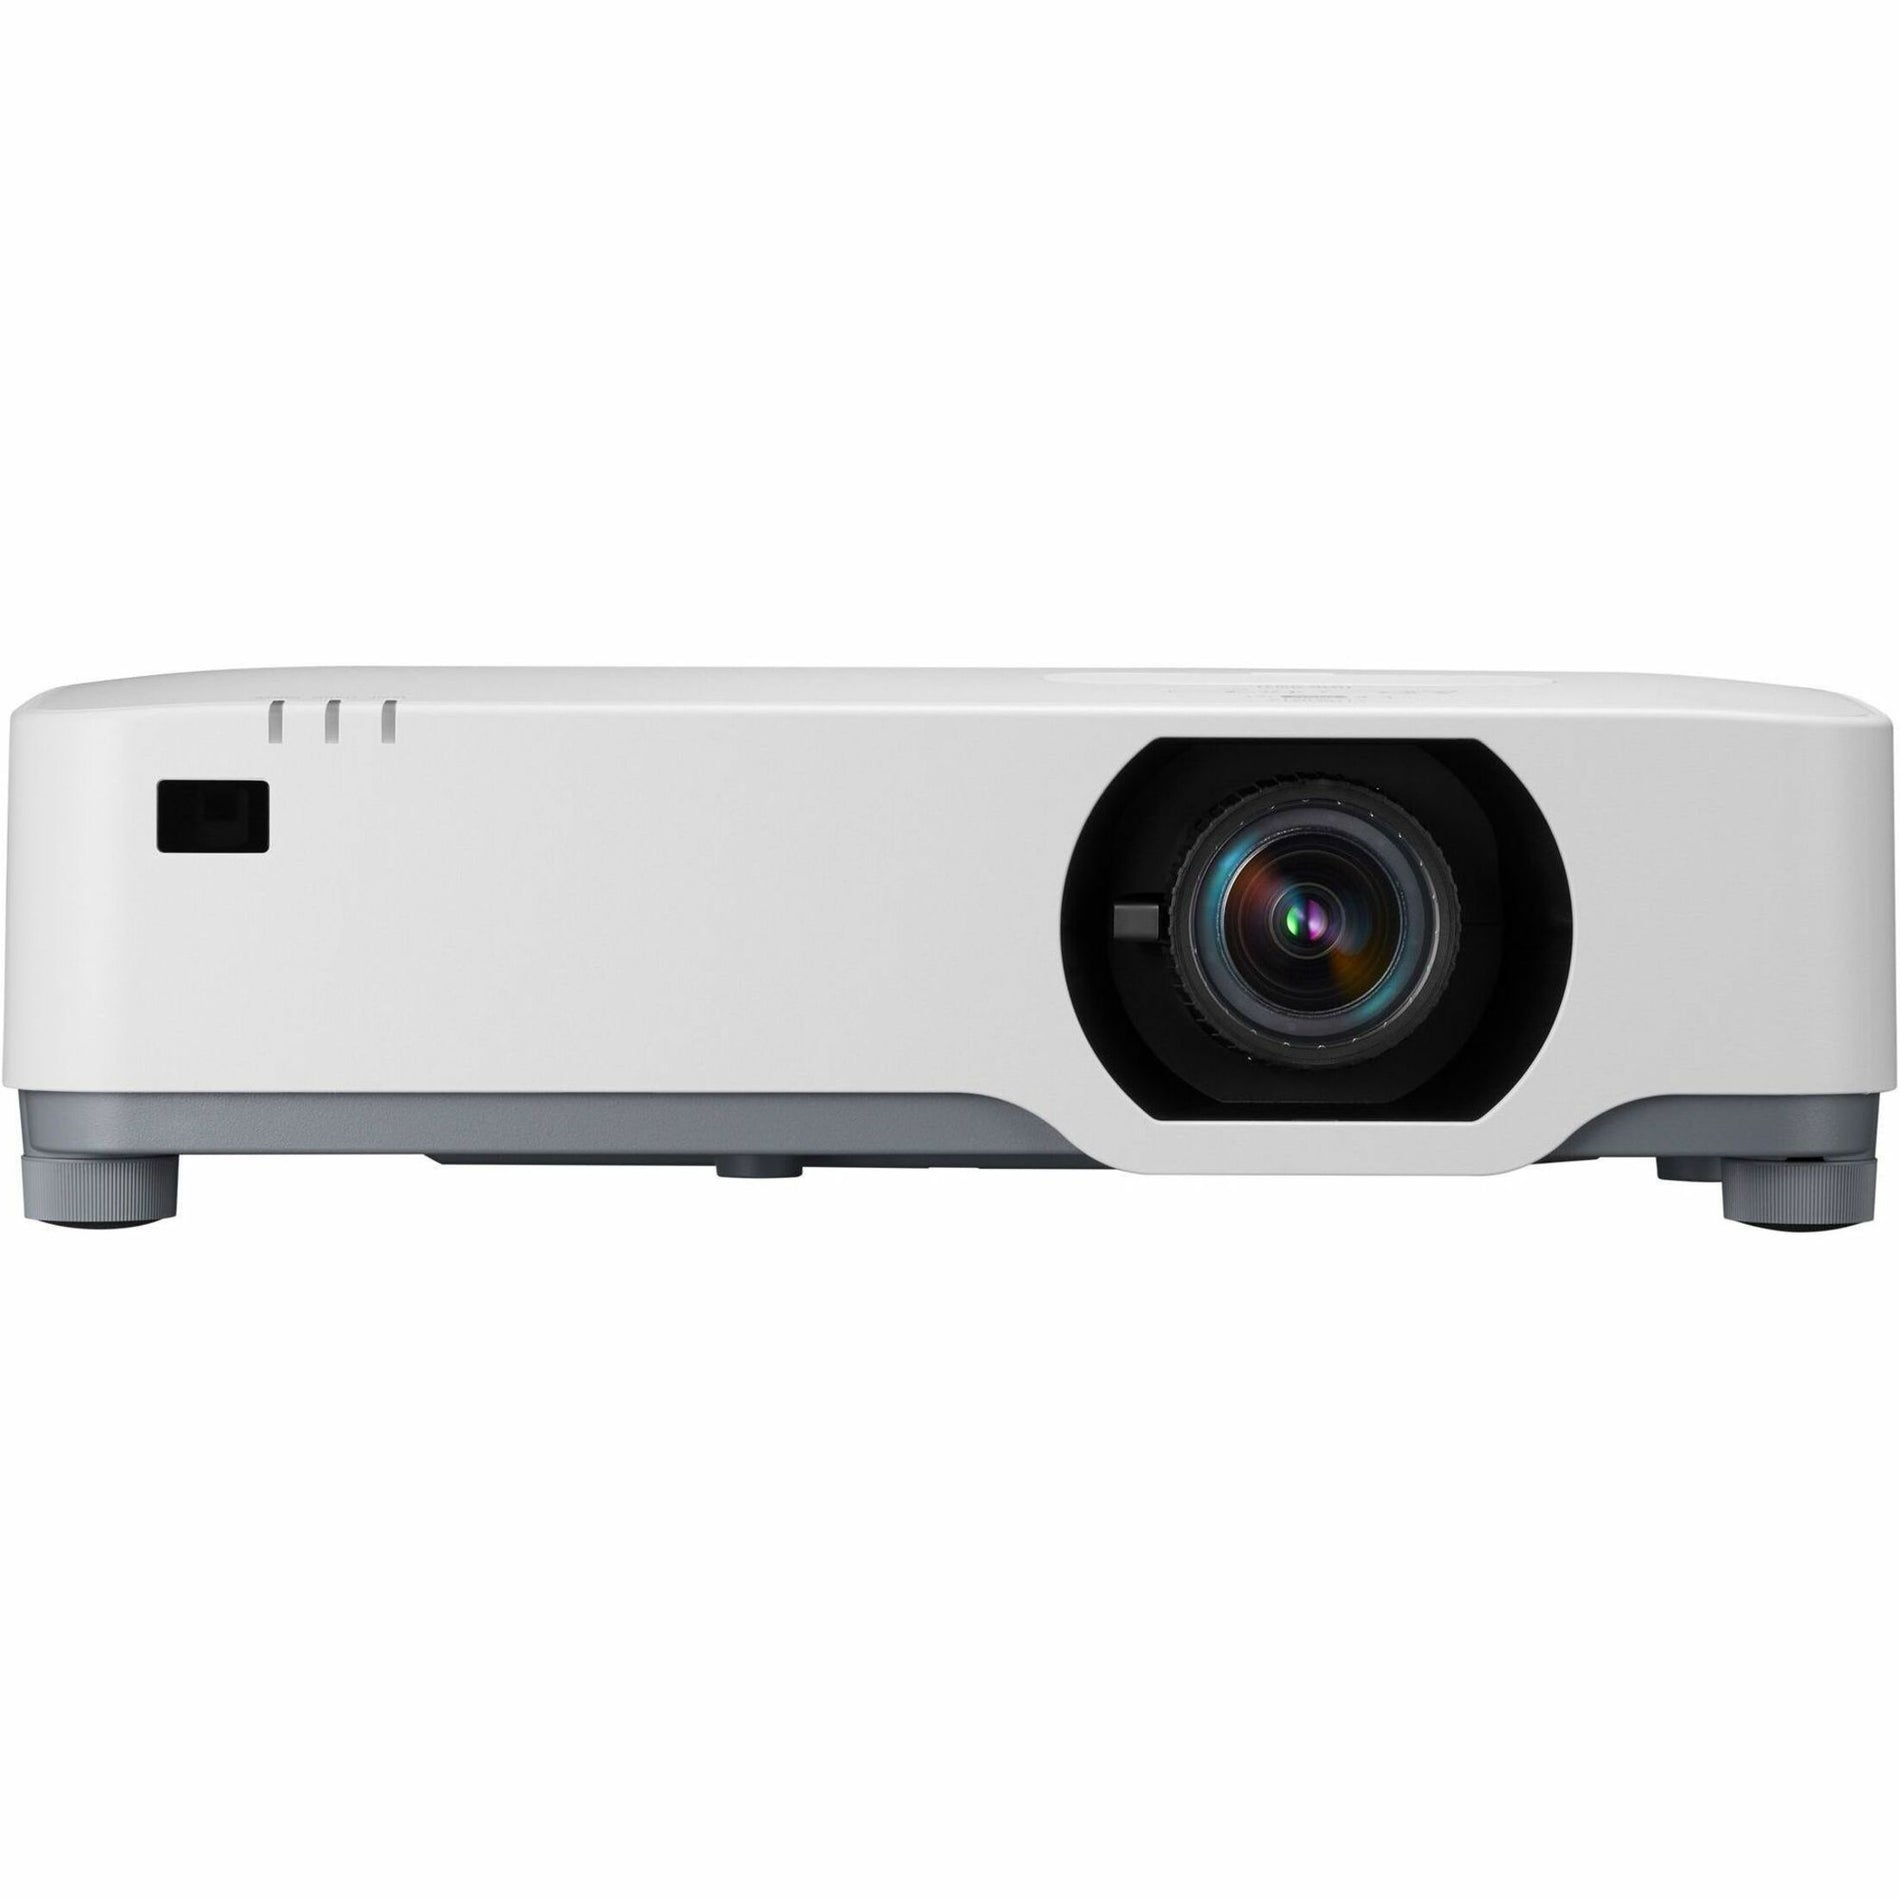 Sharp NEC Display NP-P547UL 5,400 Lumen, WUXGA, Laser, LCD Projector, Ideal for Education, Presentation, and Large Venue